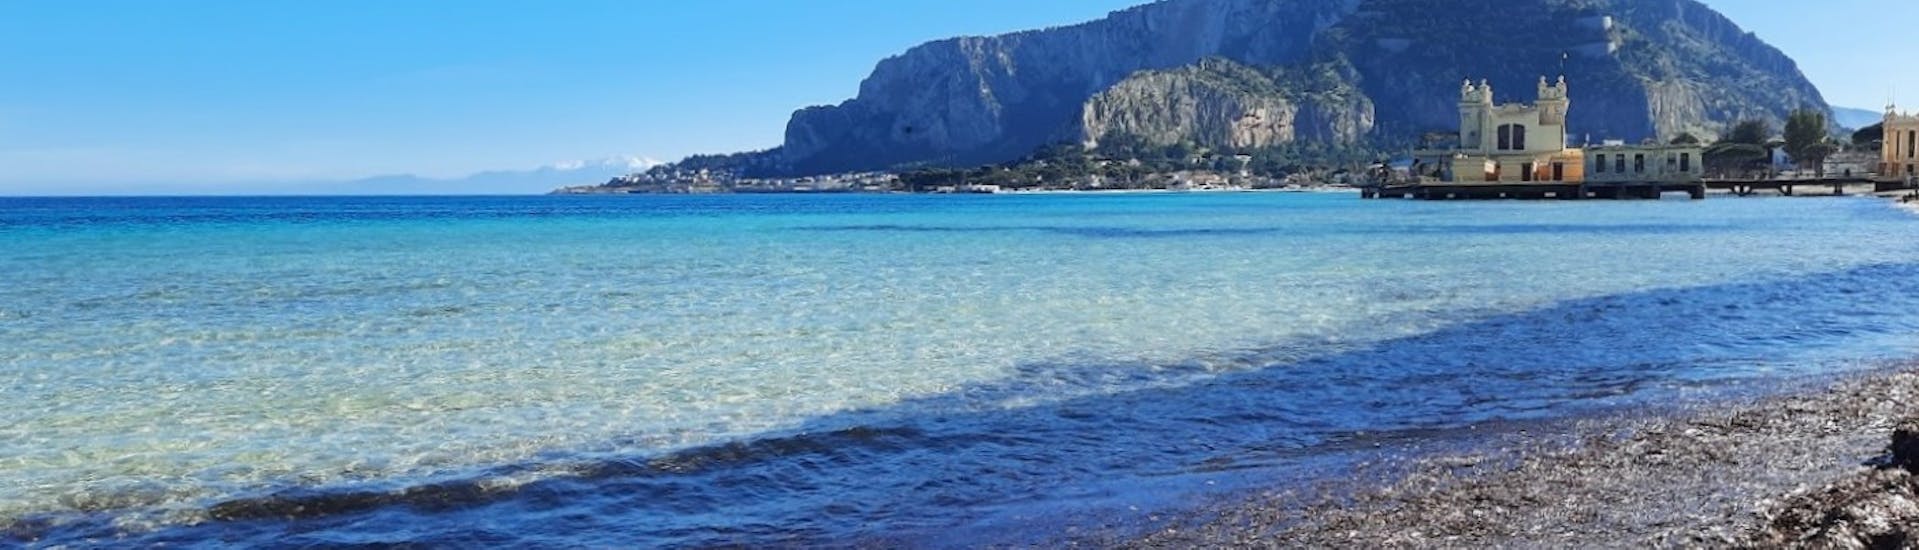 A picture of the beach in Mondello, taken during the Boat Trip to Vergine Maria, Addaura and Mondello with Aperitif with Luca e Angela Lady Grace Palermo.